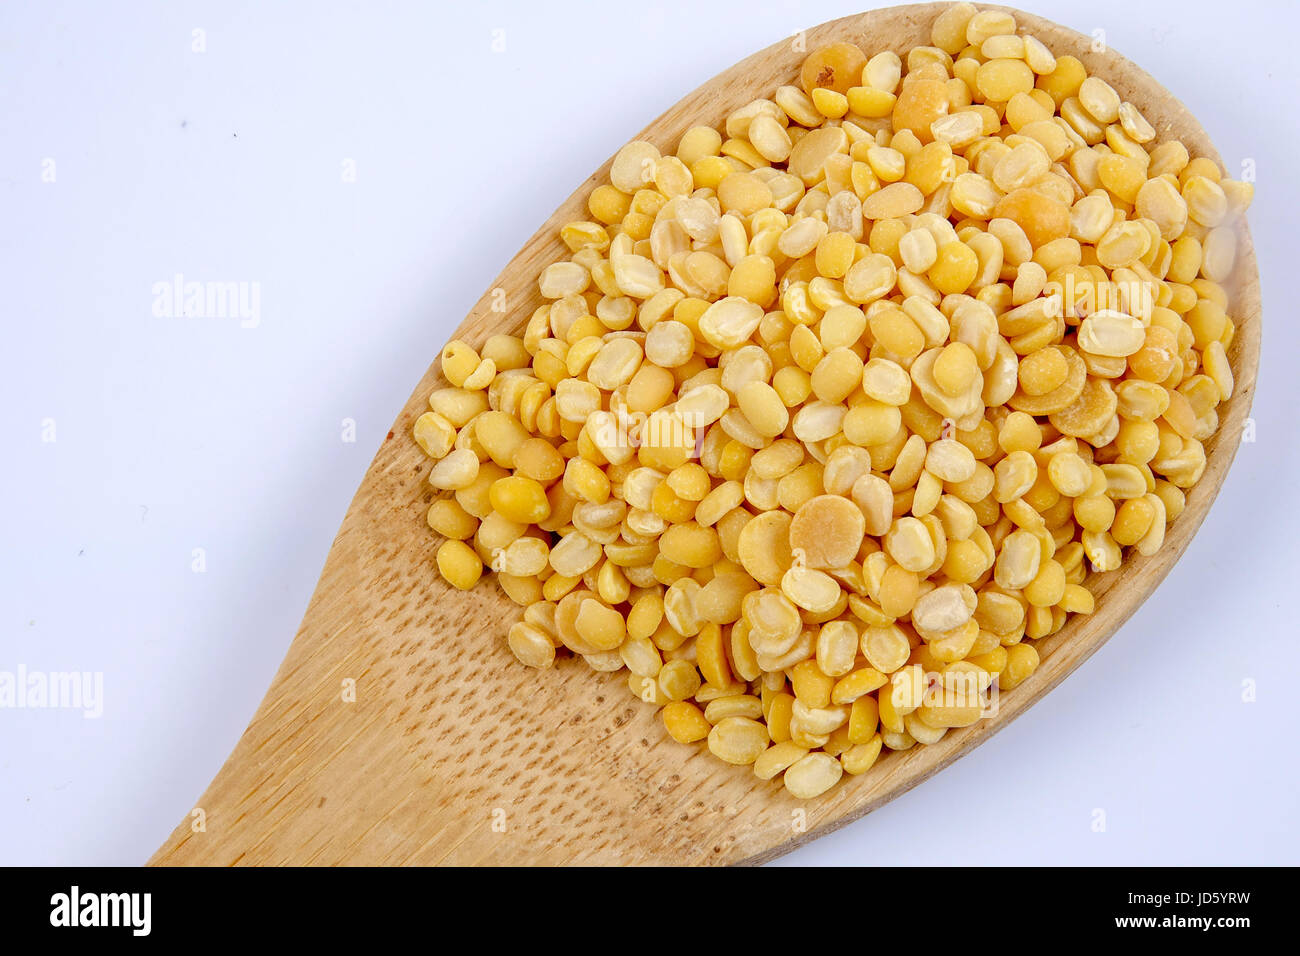 Toor dal, famous Indian legume also called yellow Pigeon peas Stock Photo